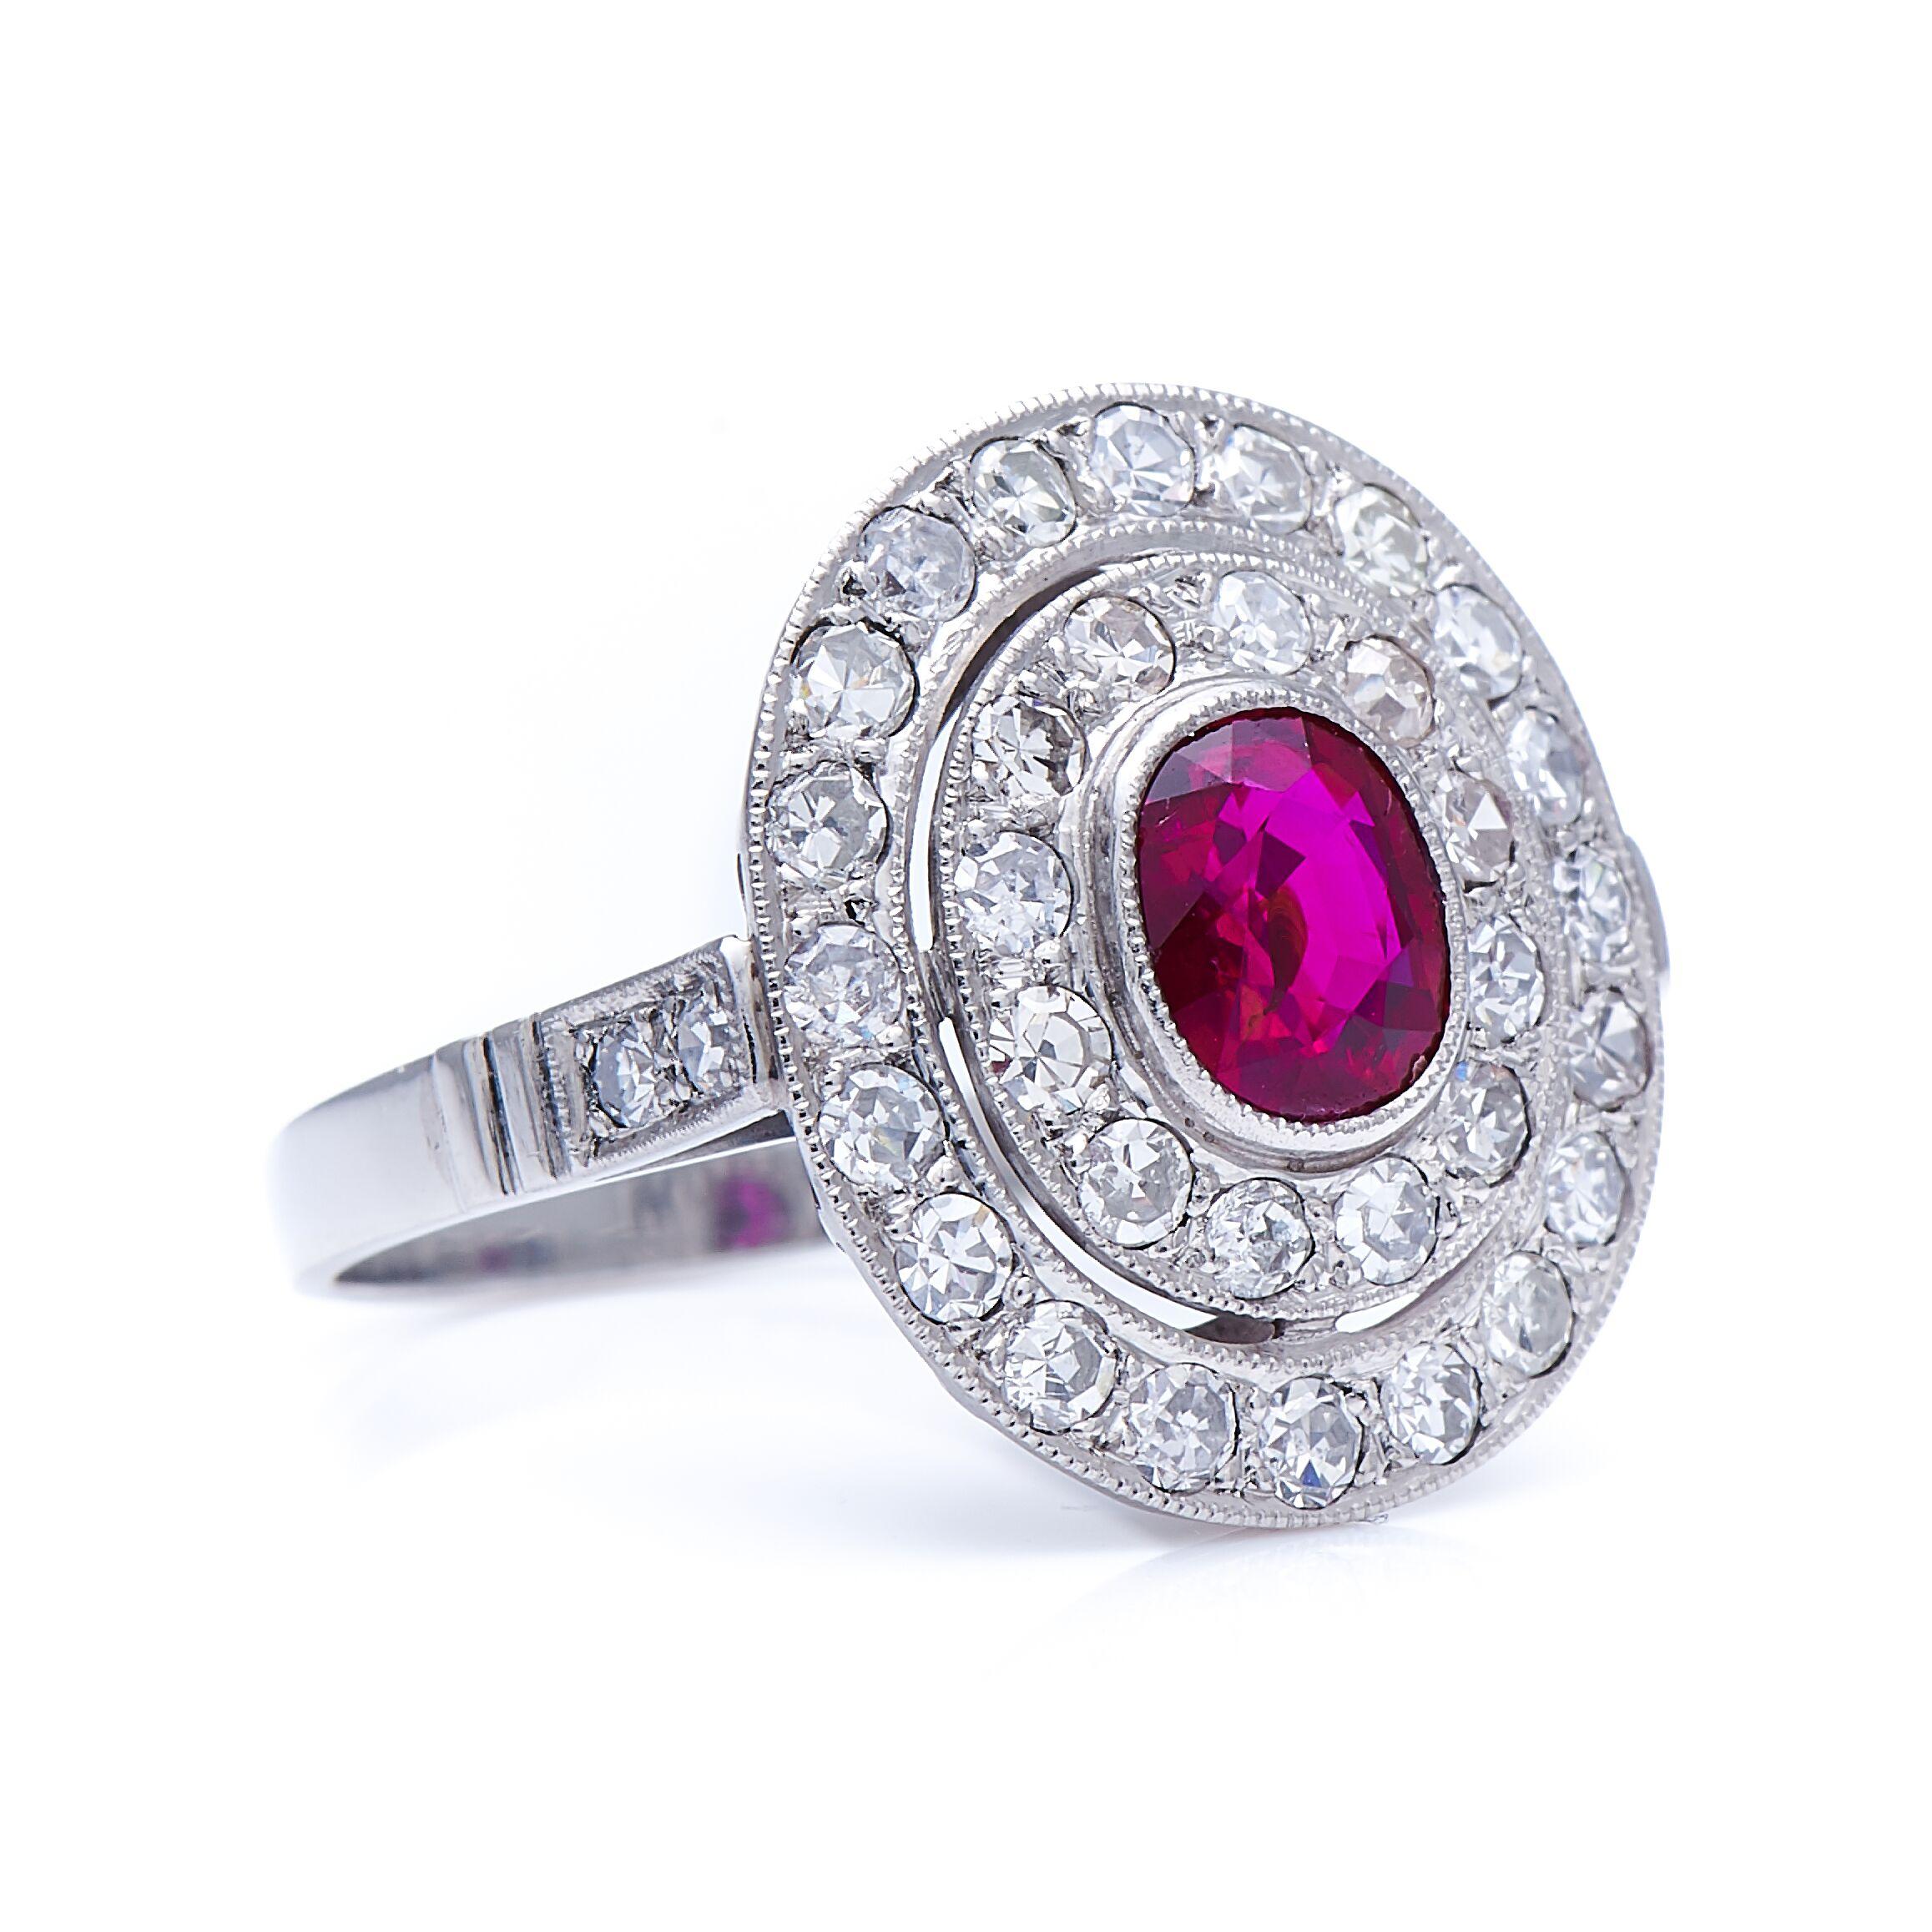 Ruby and diamond ring. The unheated Burmese ruby at the centre of this ring is of exceptional quality, weighing just over one carat, with a richly saturated, deep red tone, excellent clarity and a well-proportioned cut. Surrounding this rare stone